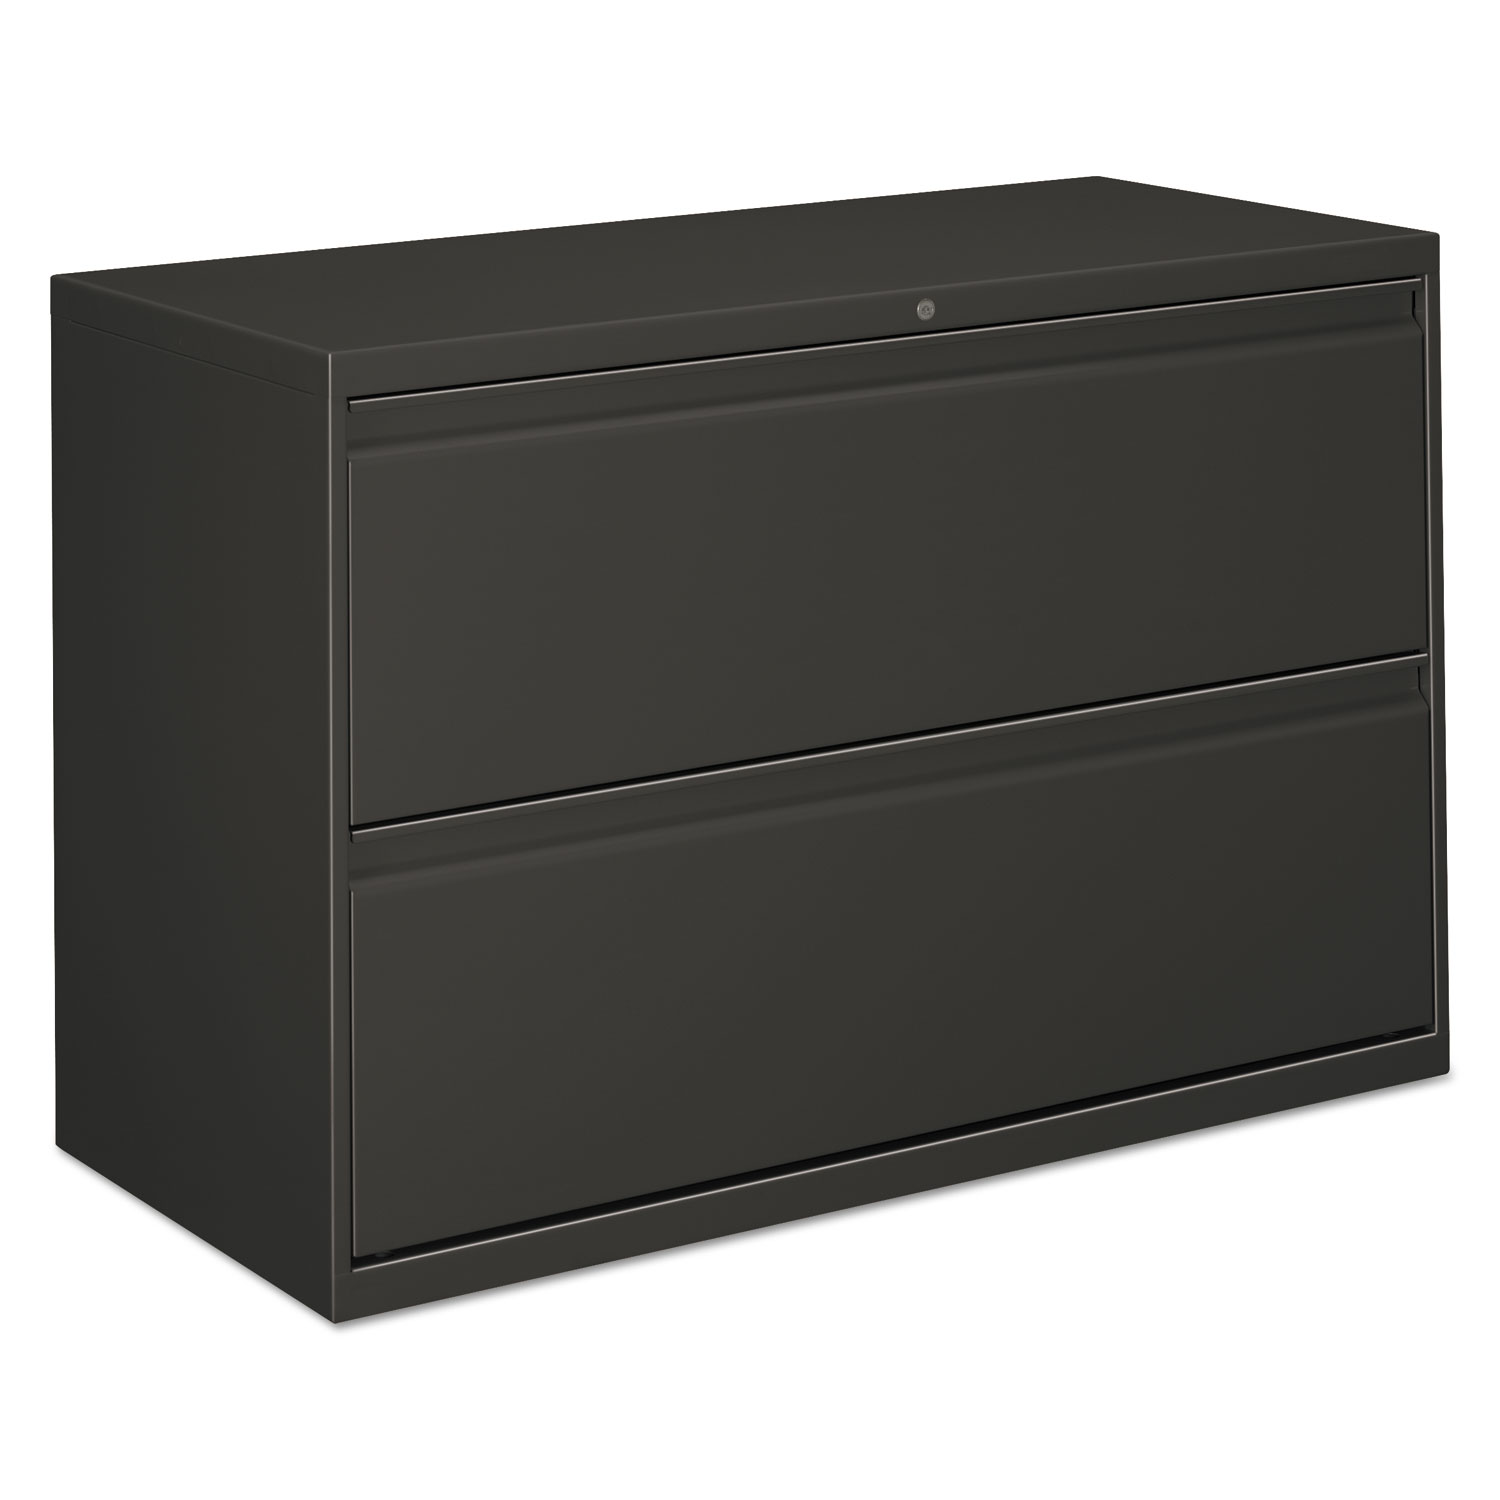  Alera ALELF4229CC Two-Drawer Lateral File Cabinet, 42w x 18d x 28h, Charcoal (ALELF4229CC) 